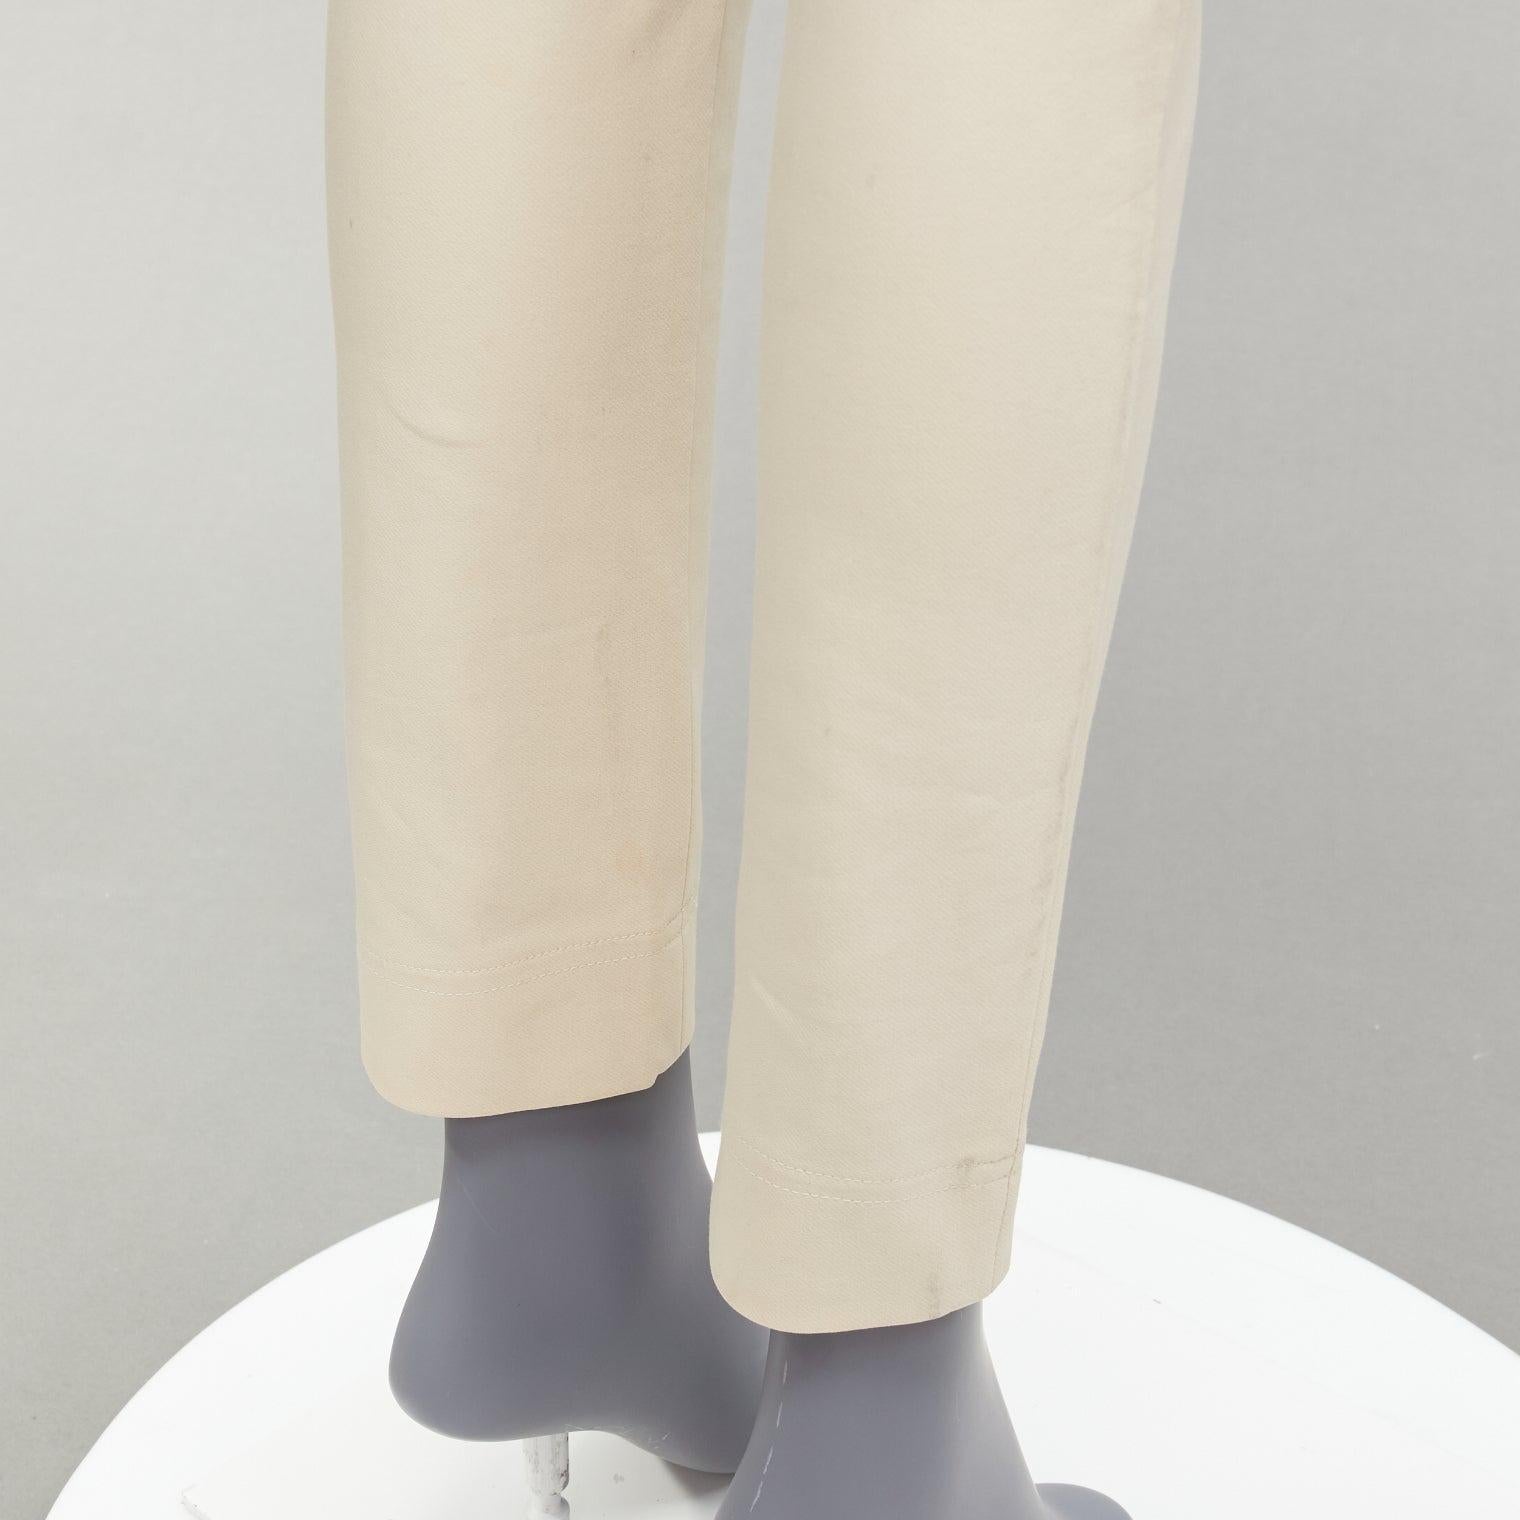 STELLA MCCARTNEY cream cotton blend stretchy cropped skinny pants IT38 XS
Reference: LNKO/A02240
Brand: Stella McCartney
Designer: Stella McCartney
Material: Cotton, Blend
Color: Cream
Pattern: Solid
Closure: Zip Fly
Made in: